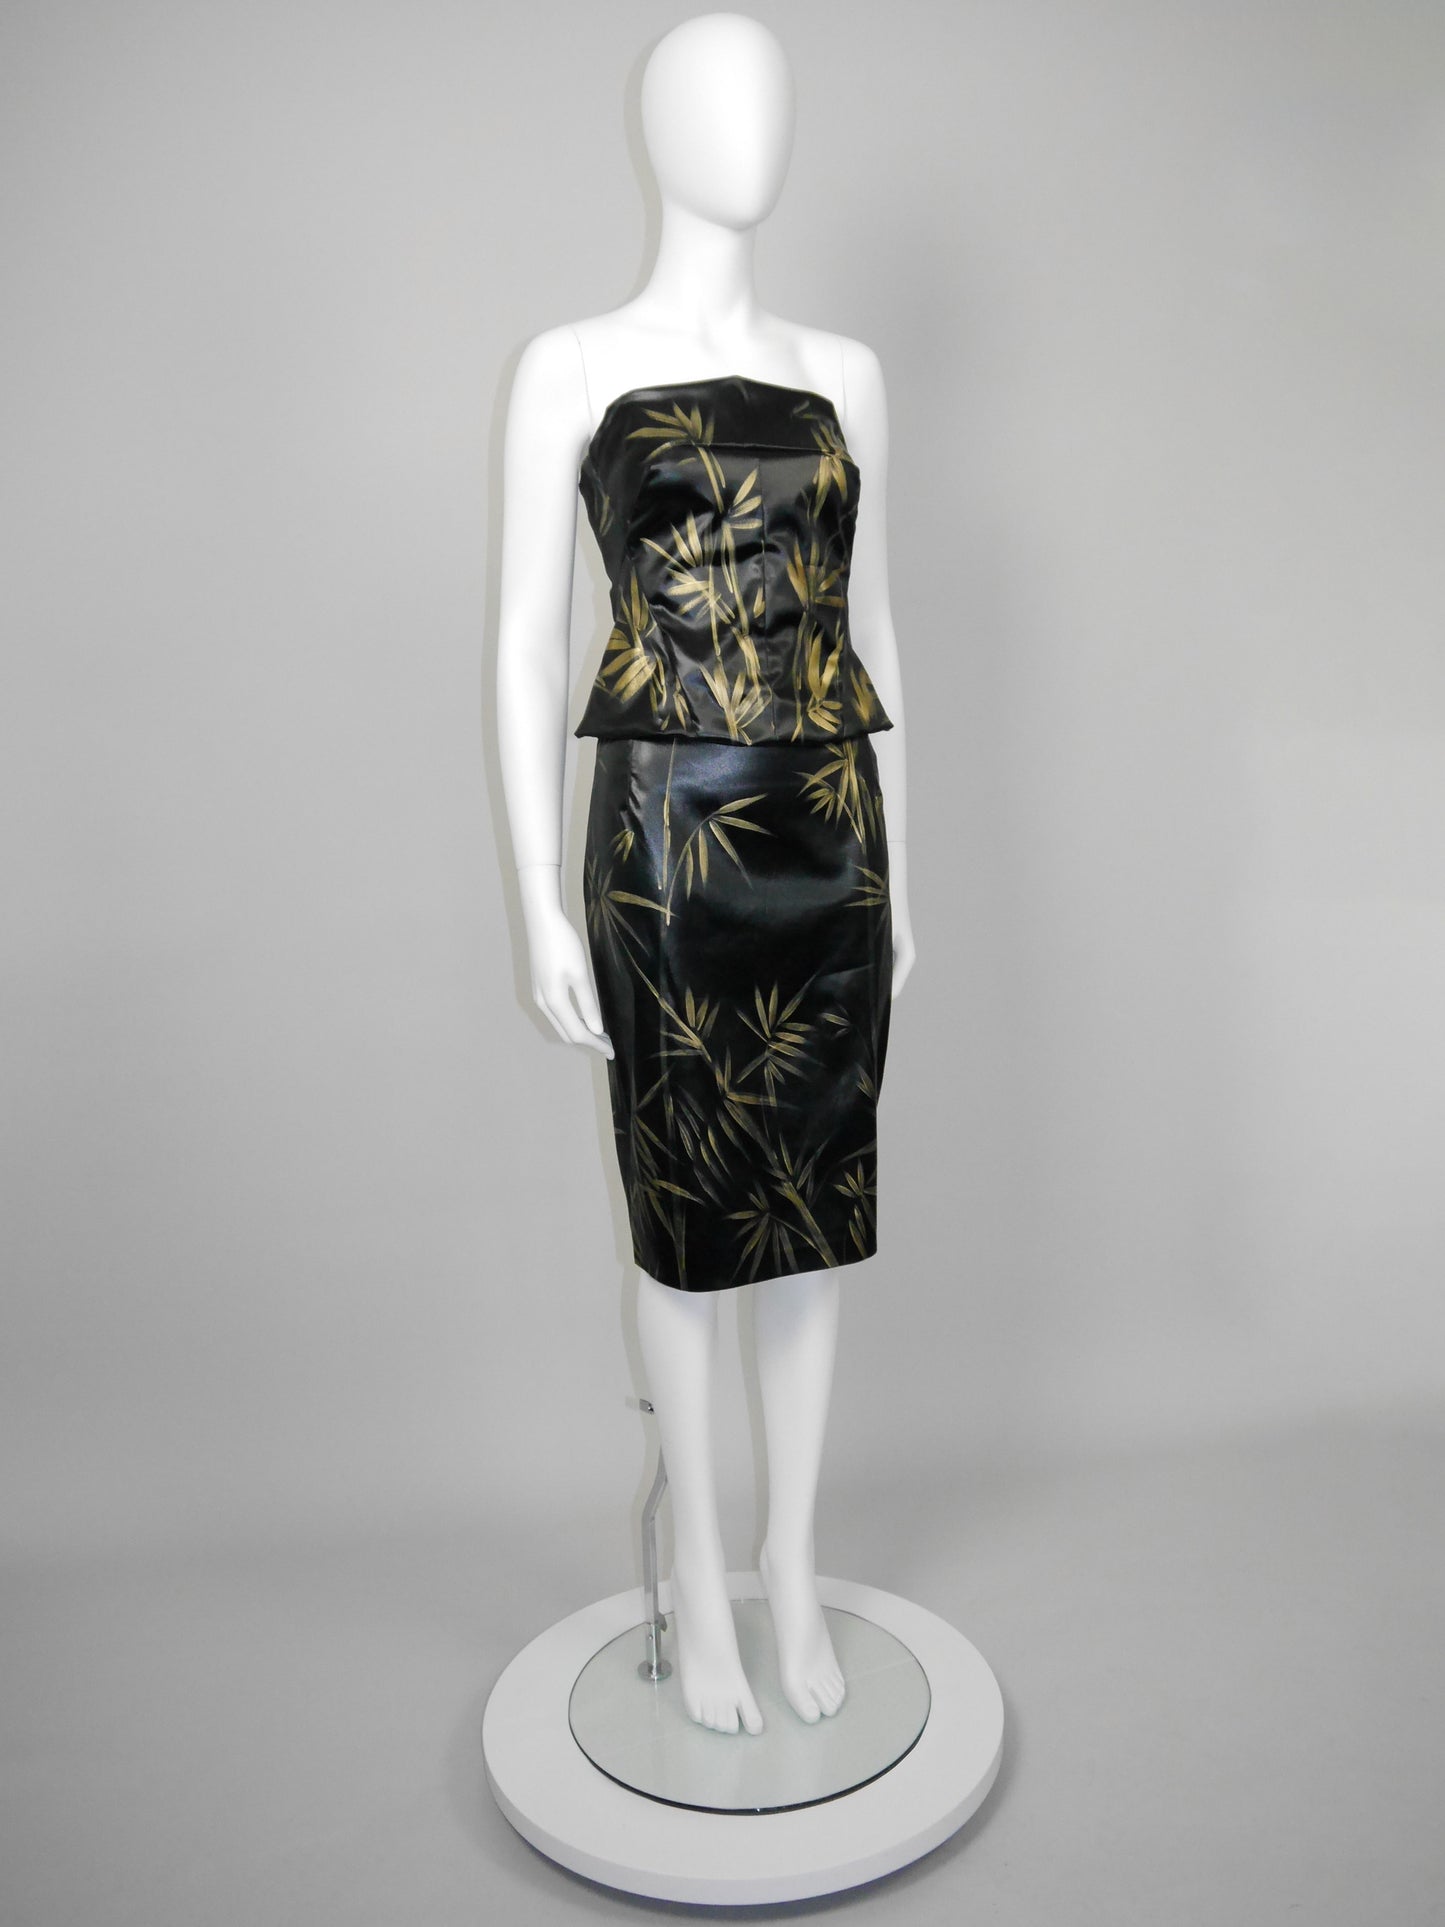 DOLCE & GABBANA Spring 1999 Vintage Hand-Painted Wet Look Bustier Top & Skirt Set Size S